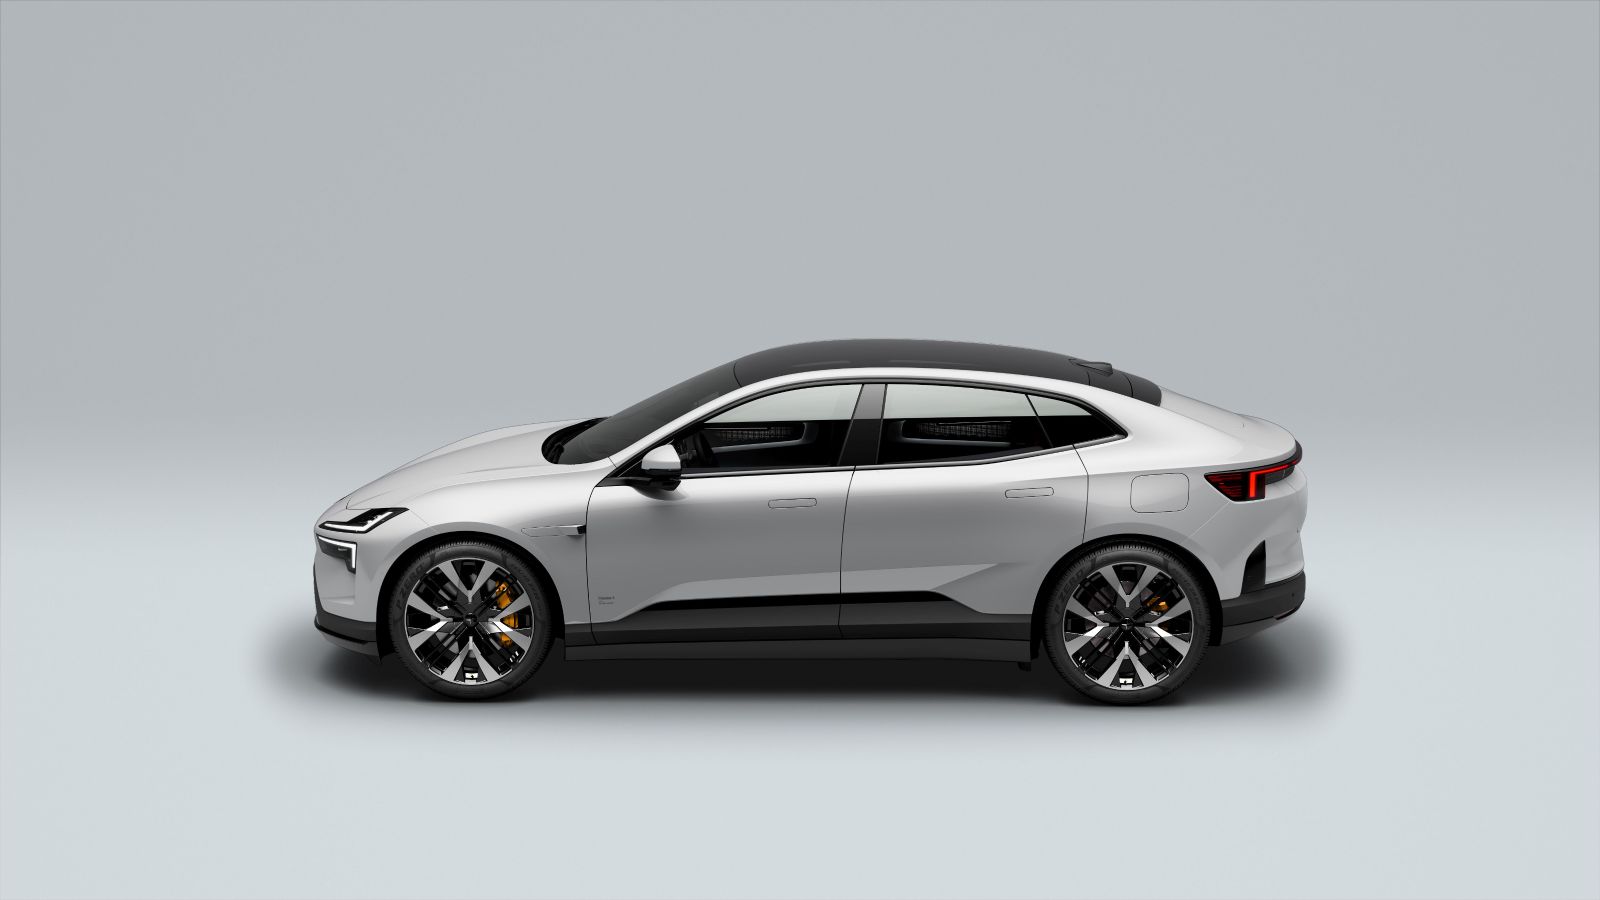 News - Polestar 4: The Future of Sustainable Electric Performance Cars? | myEVreview